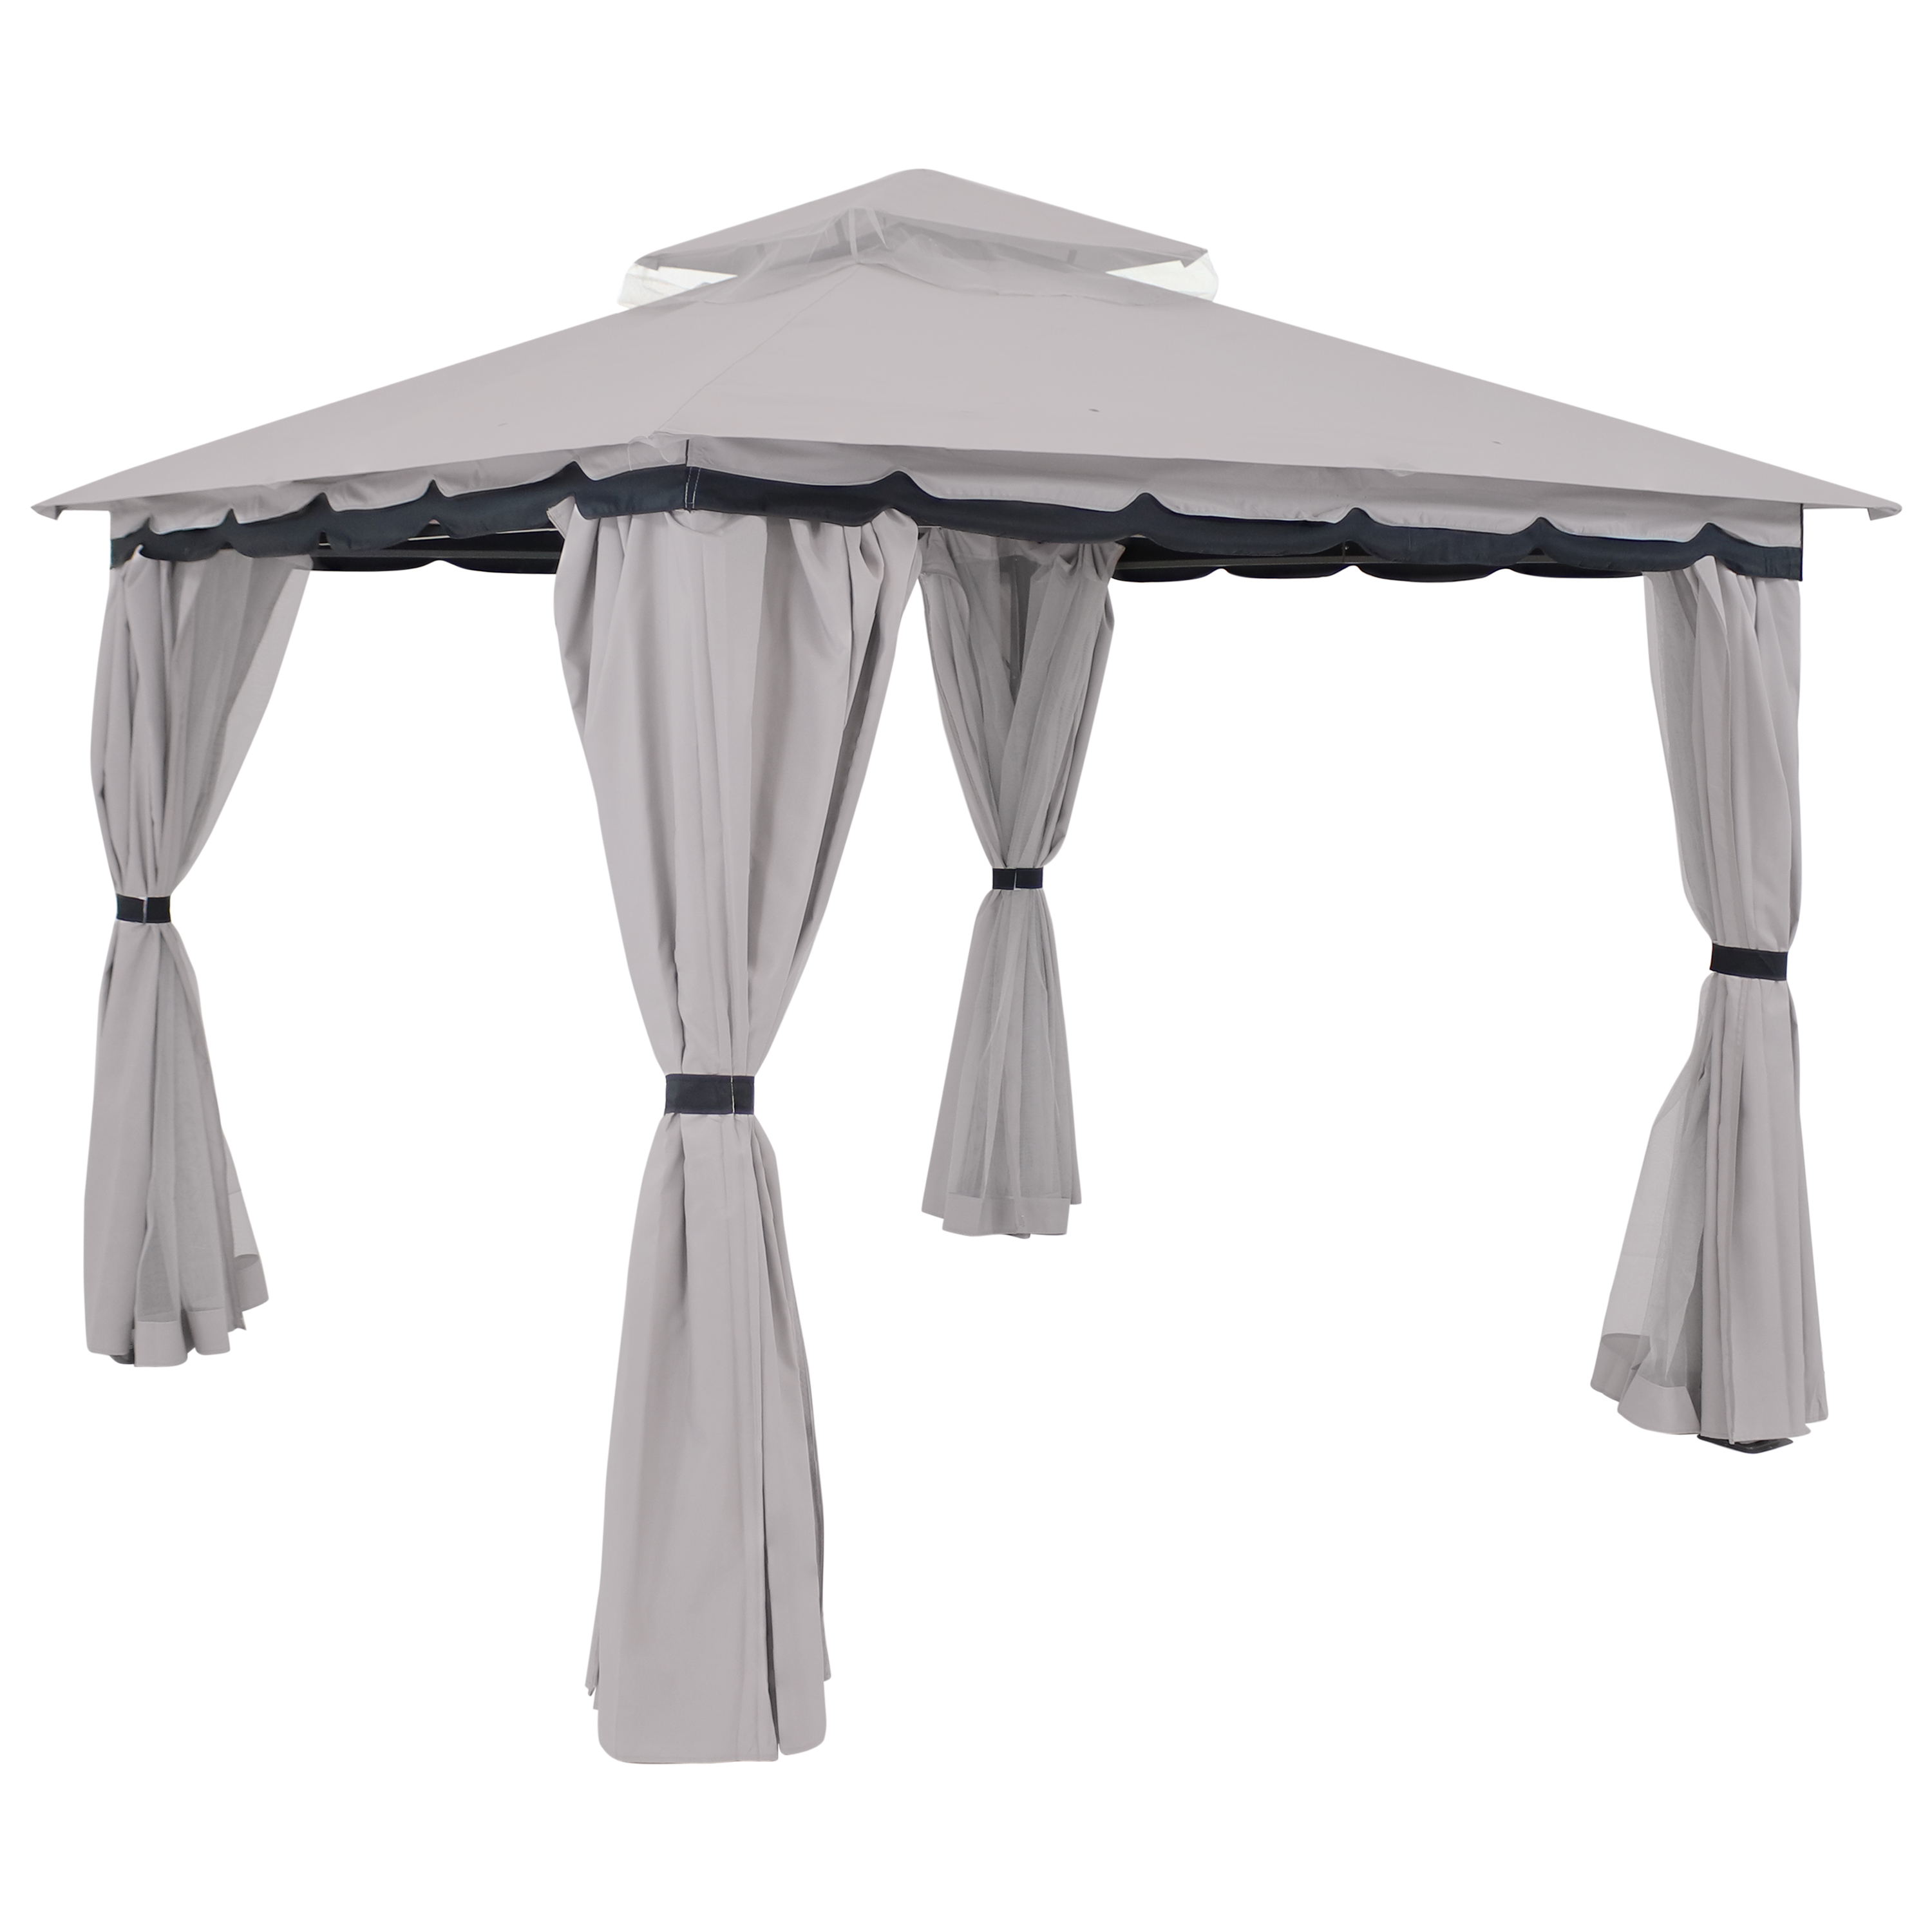 Sunnydaze Soft Top Patio Gazebo - 10x10 Foot with Mesh Screen and Privacy Wall - Gray